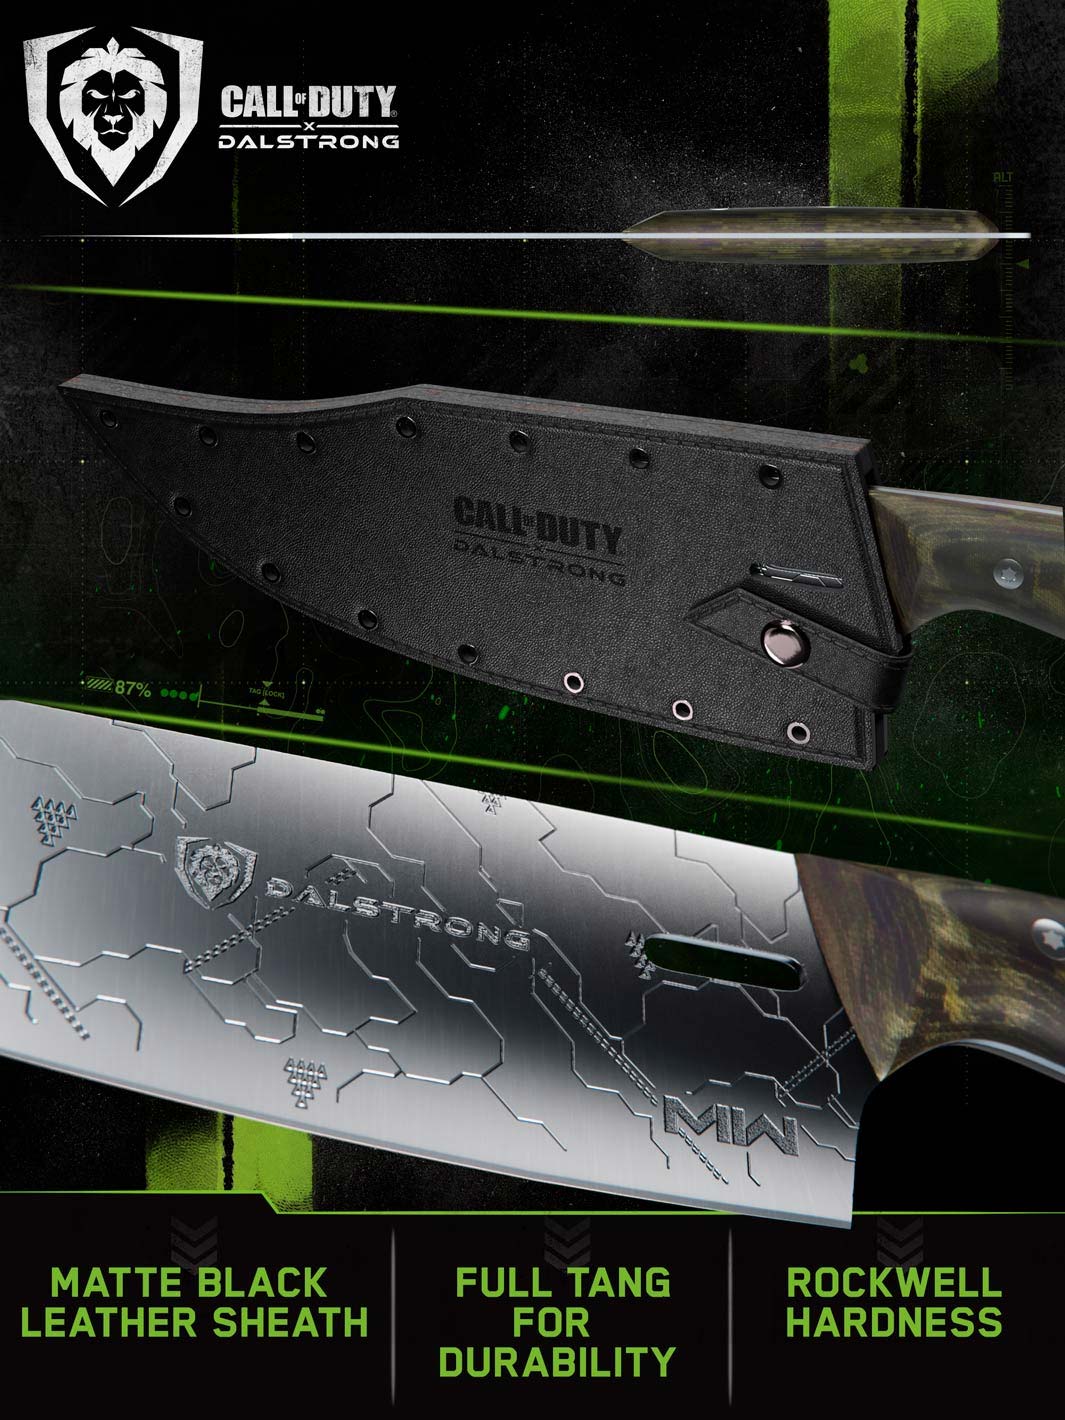 Dalstrong call of duty series 8 inch chef knife featuring it's blade and sheath.